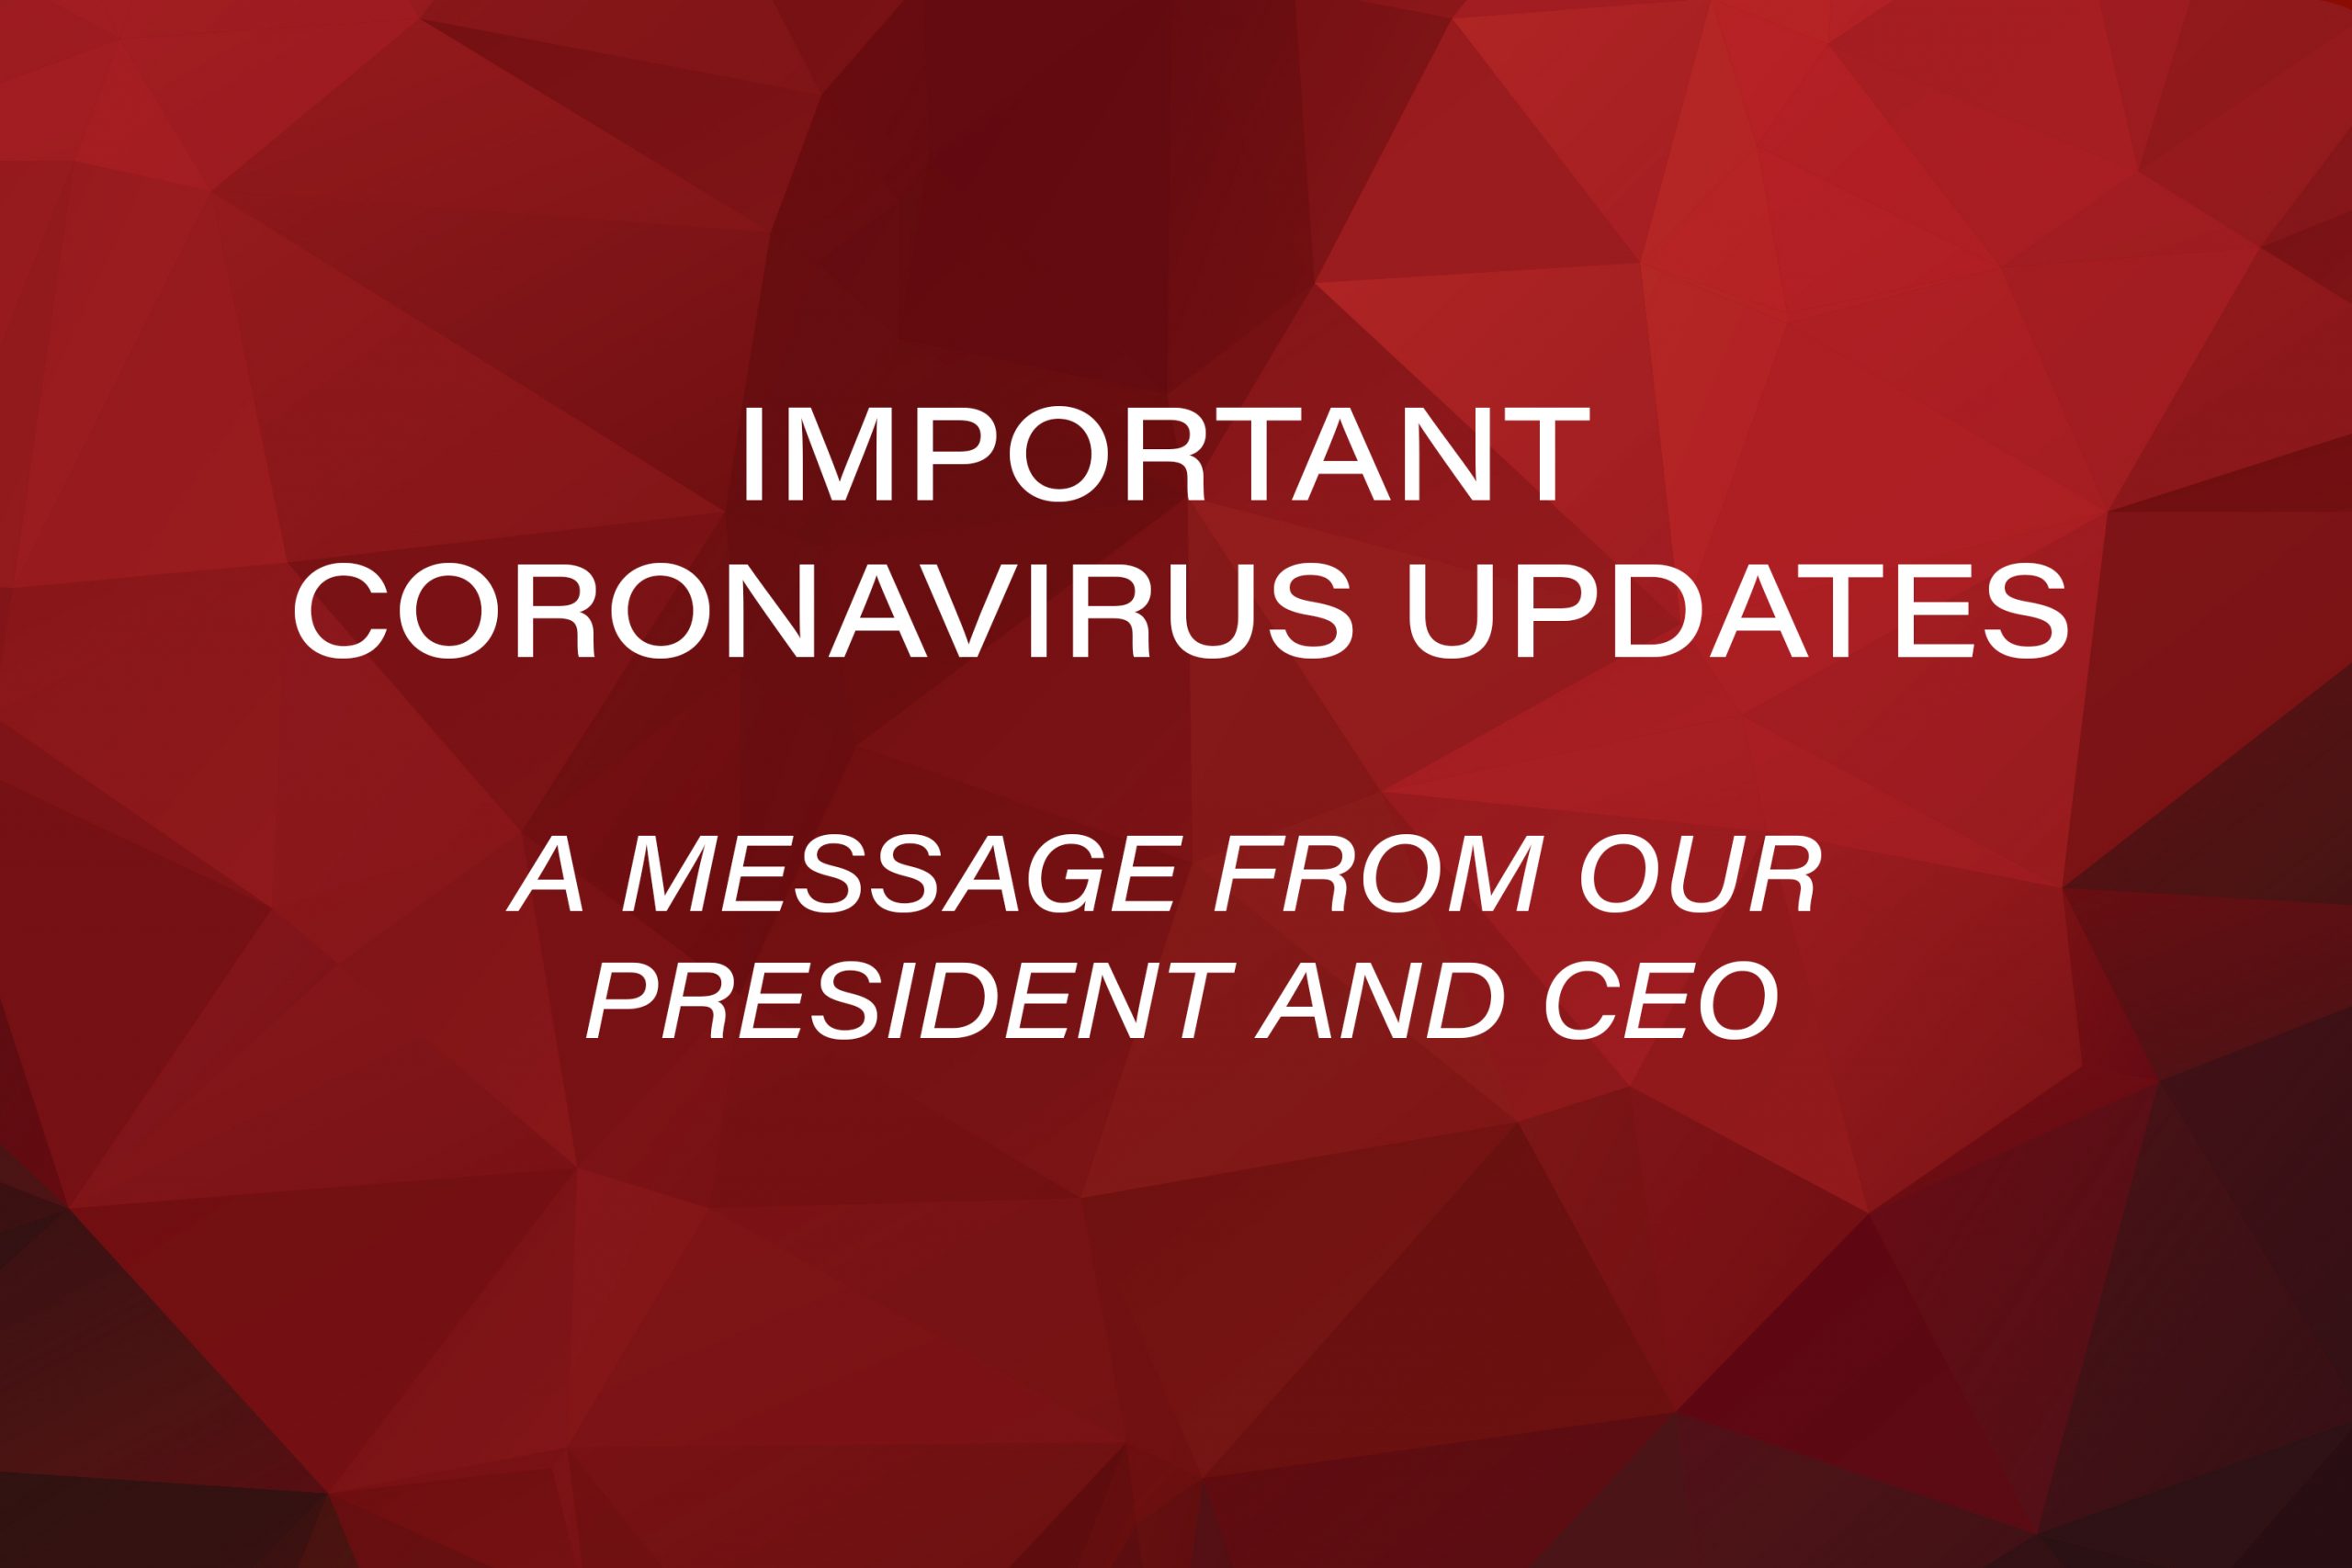 Important Coronavirus Updates. A message from our President and CEO.